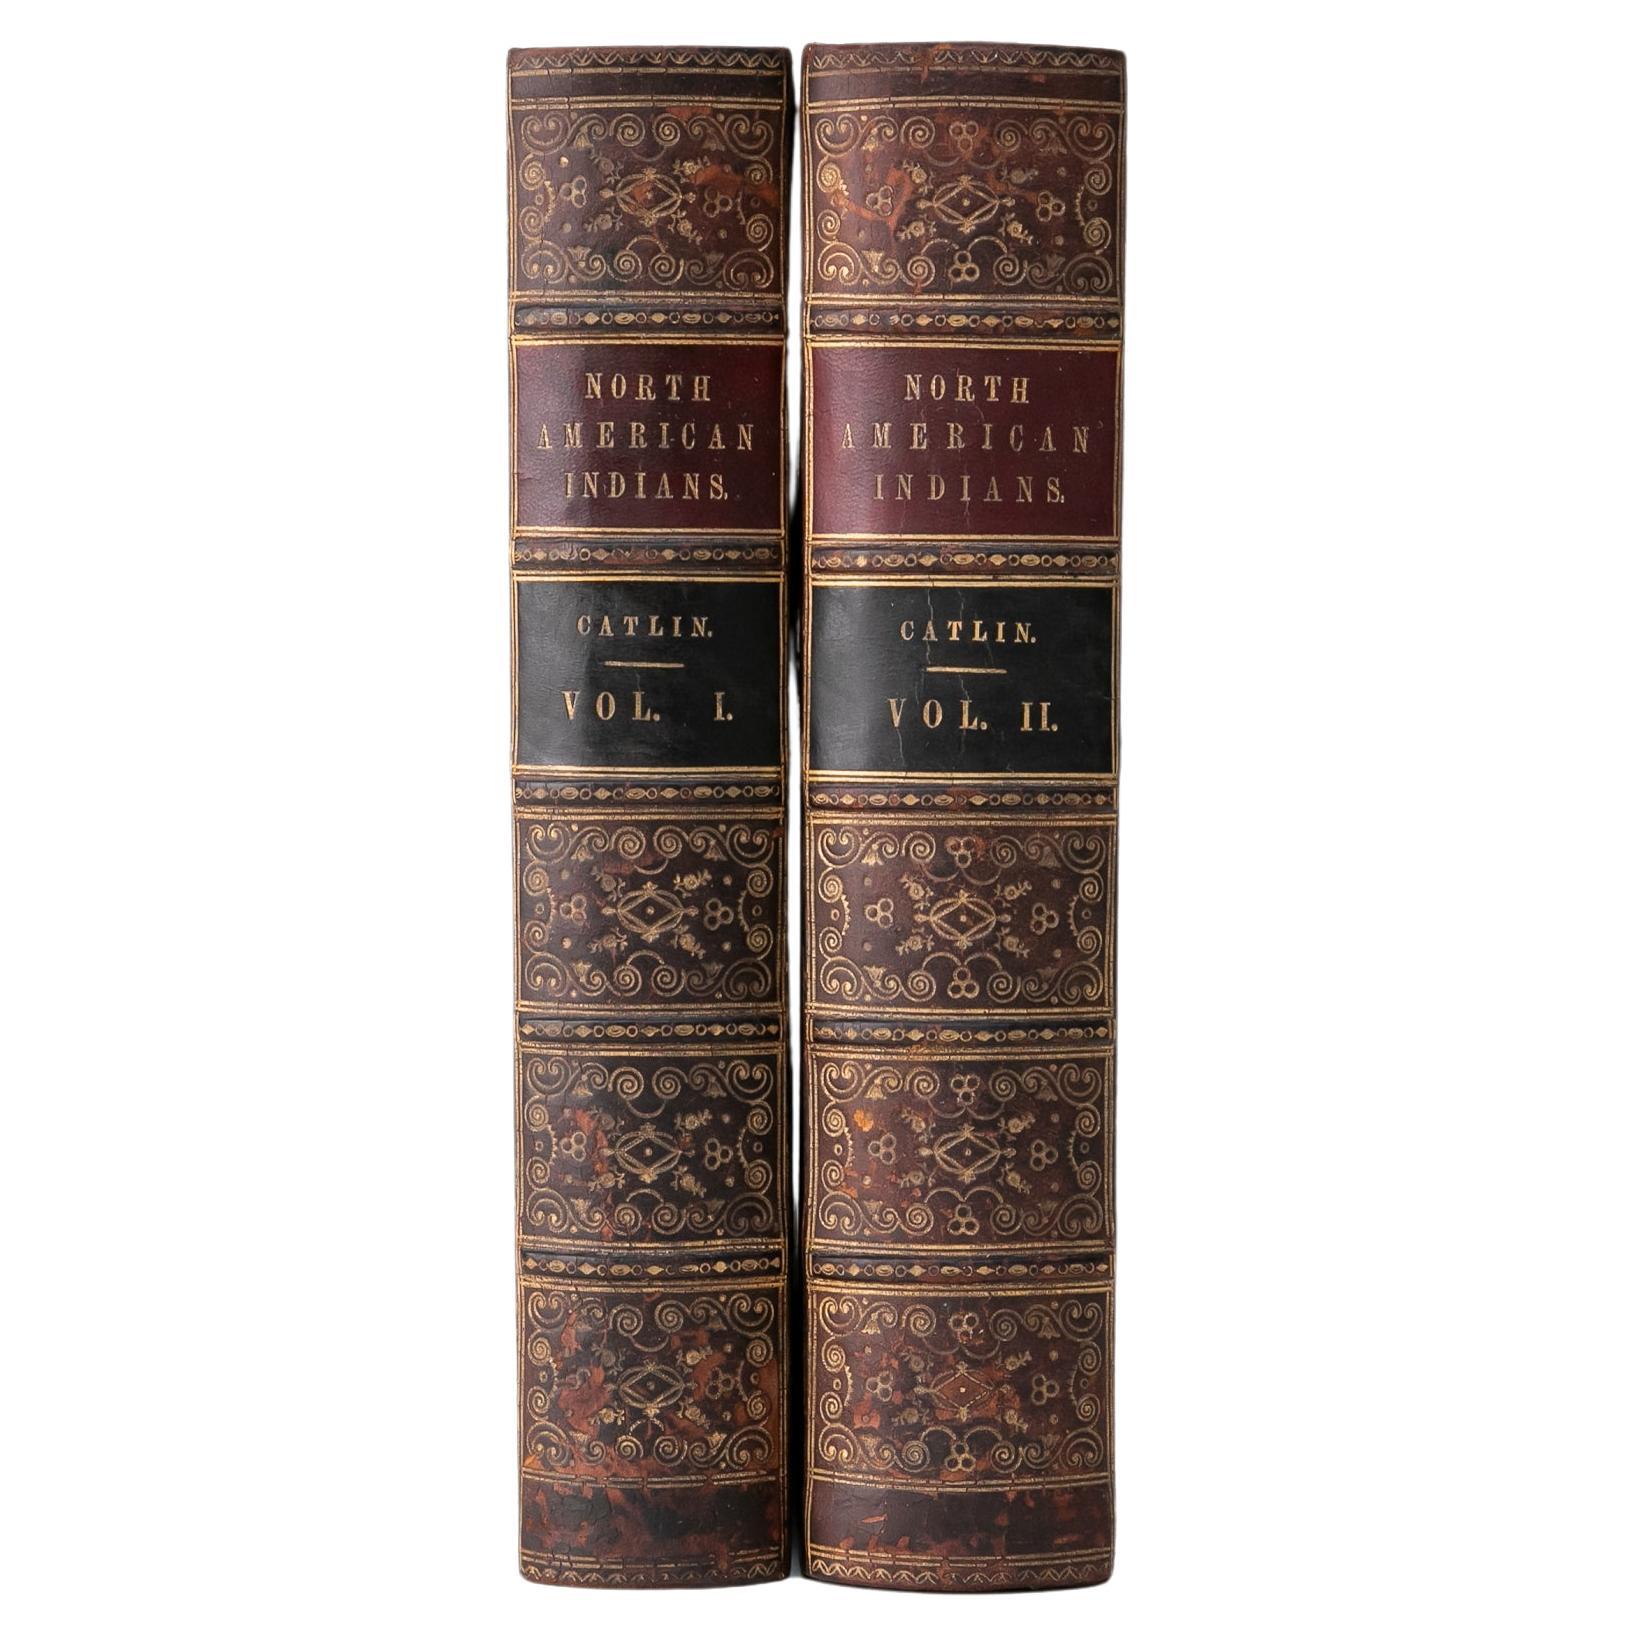 1 Volumes. George Catlin, North American Indians. For Sale